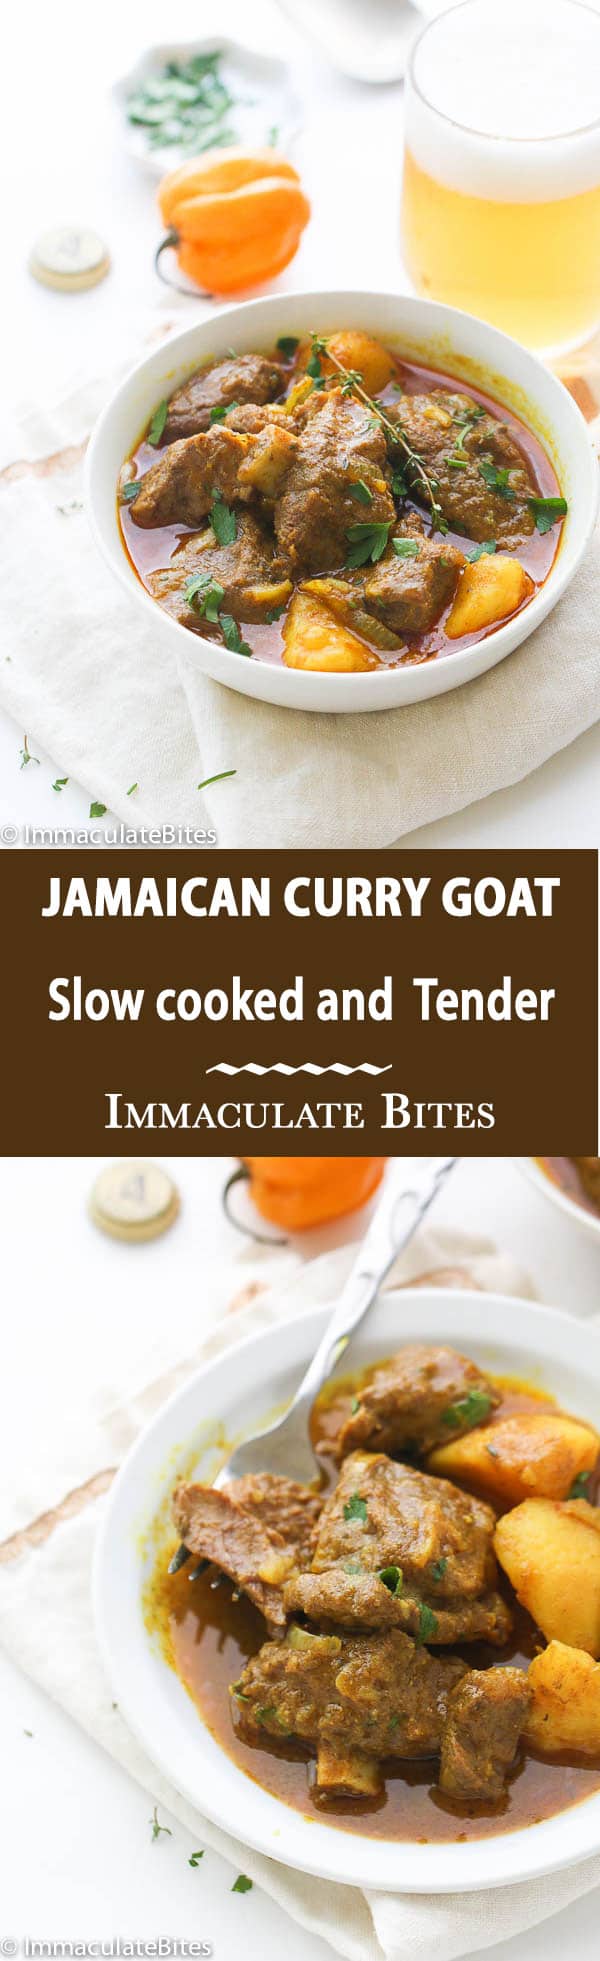 Jamaican-goat-curry